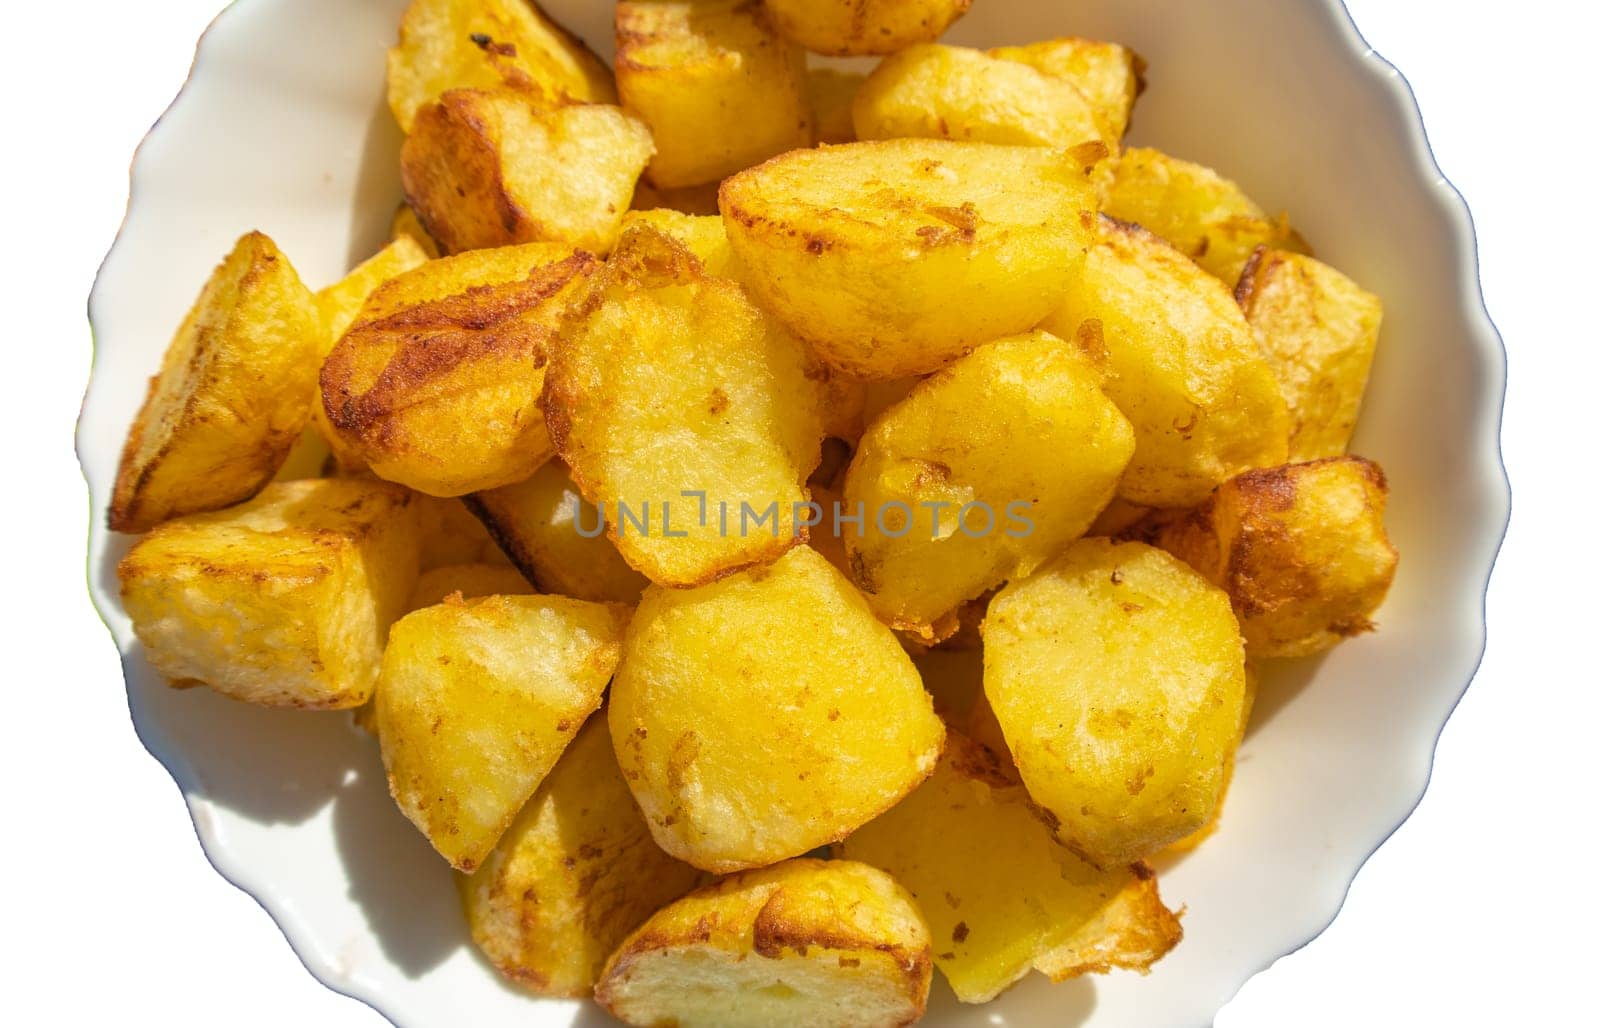 A pile of fried potatoes, cut into large slices, cut out and isolated on a white background by claire_lucia